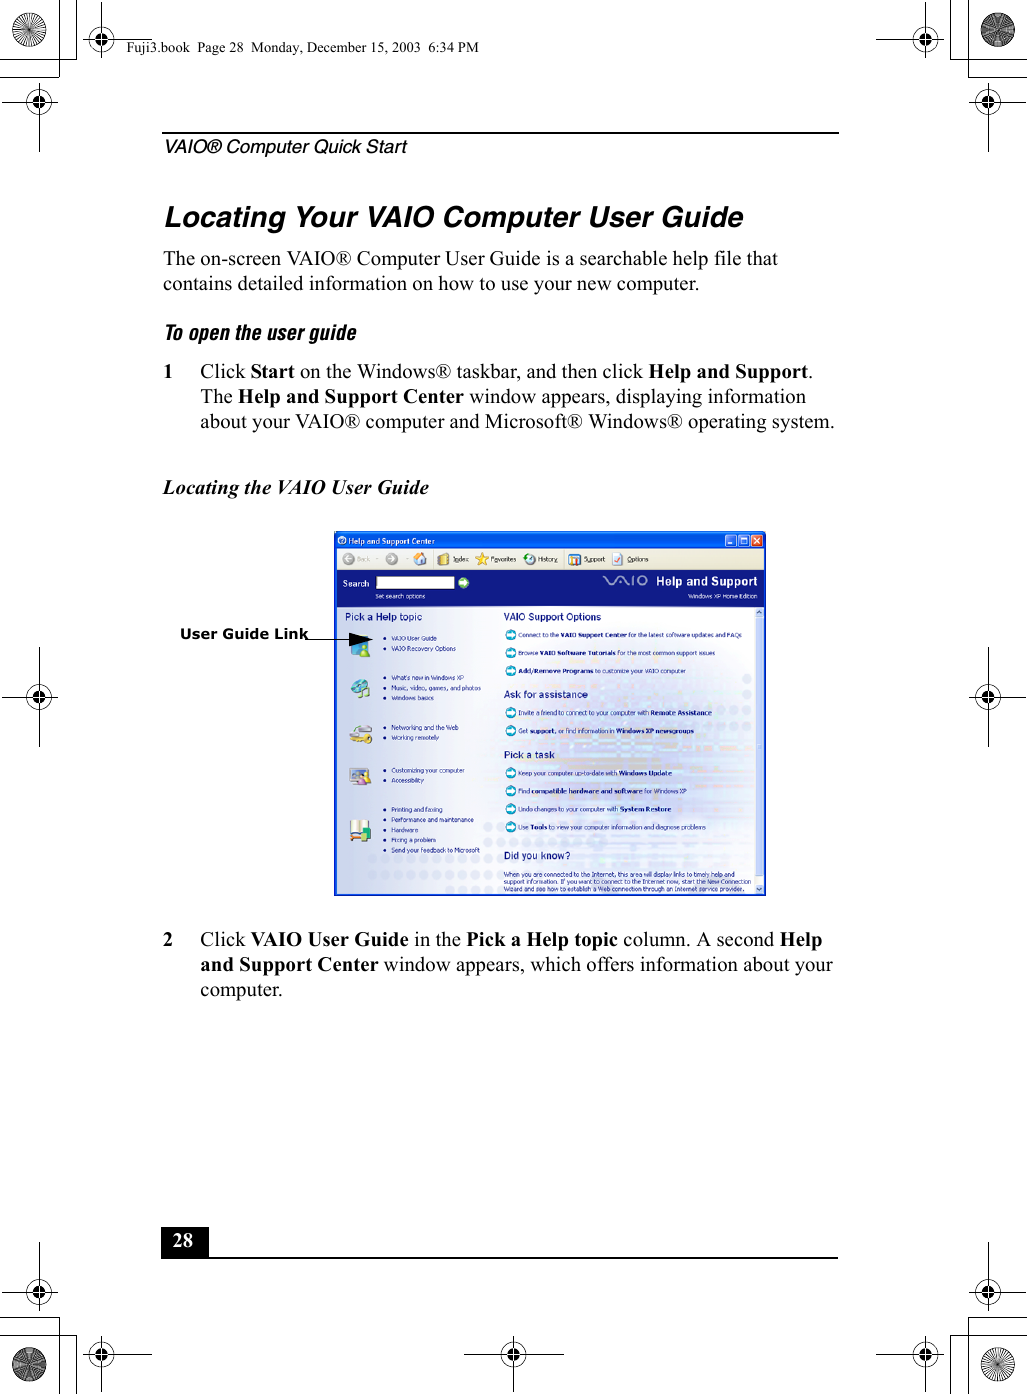 VAIO® Computer Quick Start28Locating Your VAIO Computer User GuideThe on-screen VAIO® Computer User Guide is a searchable help file that contains detailed information on how to use your new computer. To open the user guide1Click Start on the Windows® taskbar, and then click Help and Support. The Help and Support Center window appears, displaying information about your VAIO® computer and Microsoft® Windows® operating system.2Click VAIO User Guide in the Pick a Help topic column. A second Help and Support Center window appears, which offers information about your computer.Locating the VAIO User GuideUser Guide LinkFuji3.book  Page 28  Monday, December 15, 2003  6:34 PM